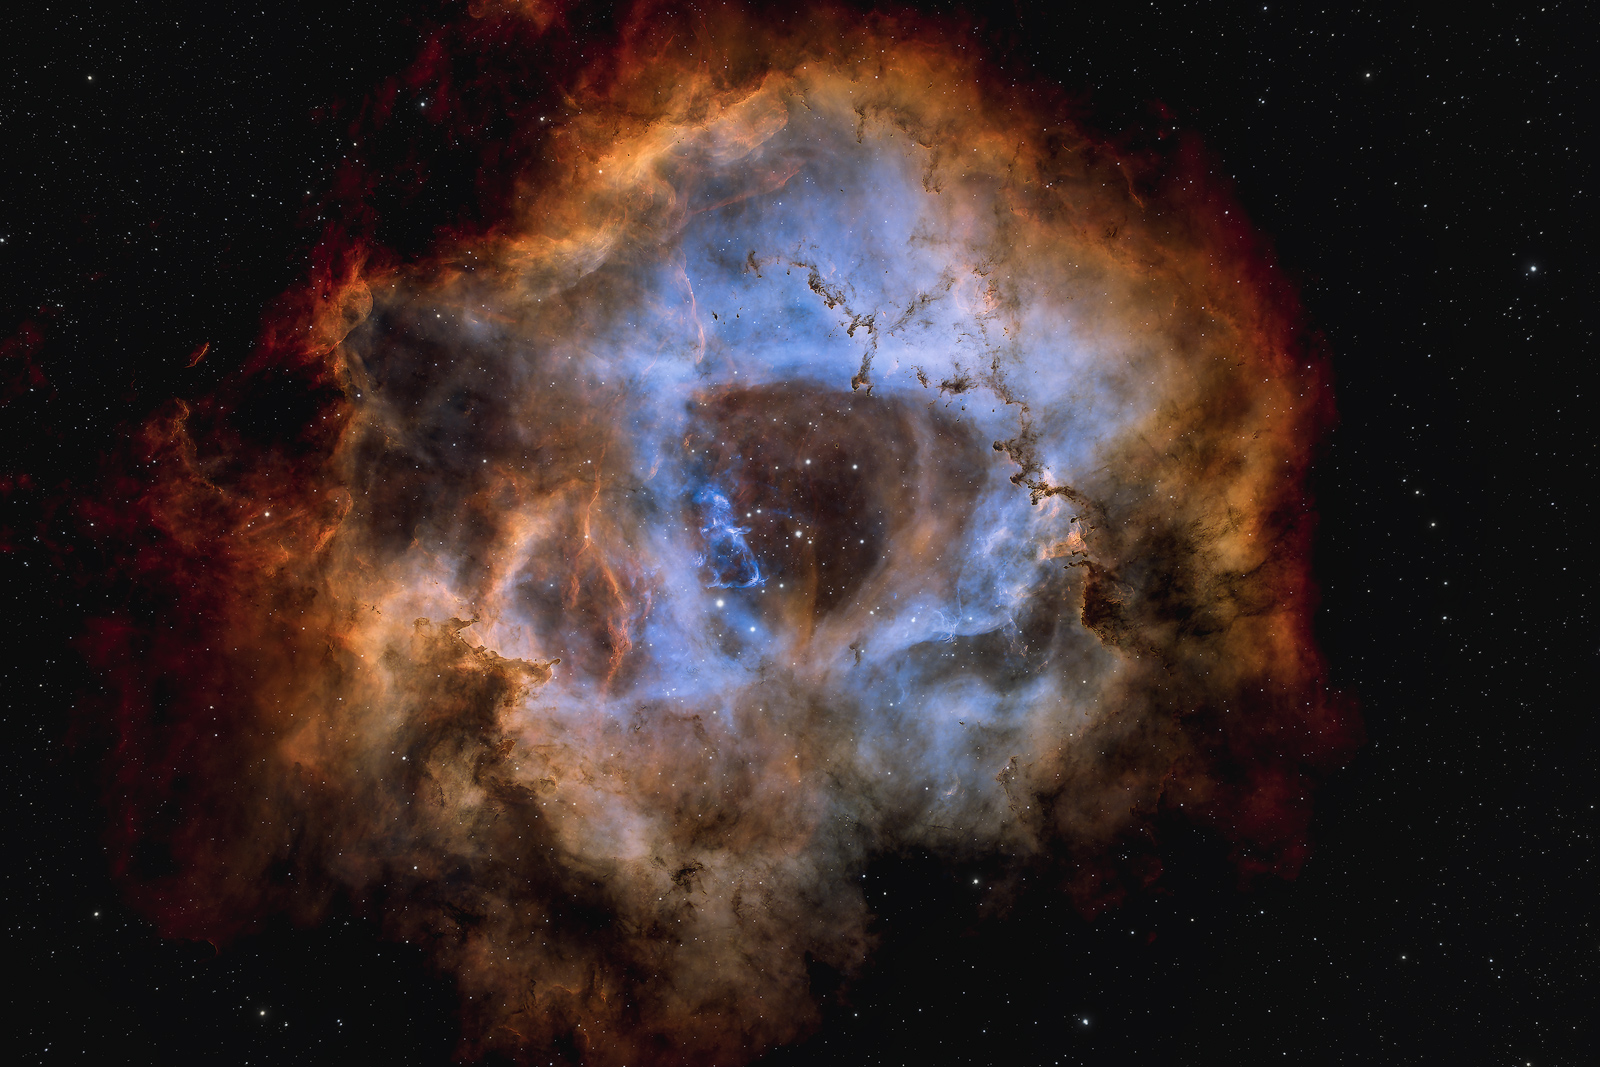 The Rosette Nebula (NGC 2237, C49), a large emission nebula located in the constellation of Monoceros.